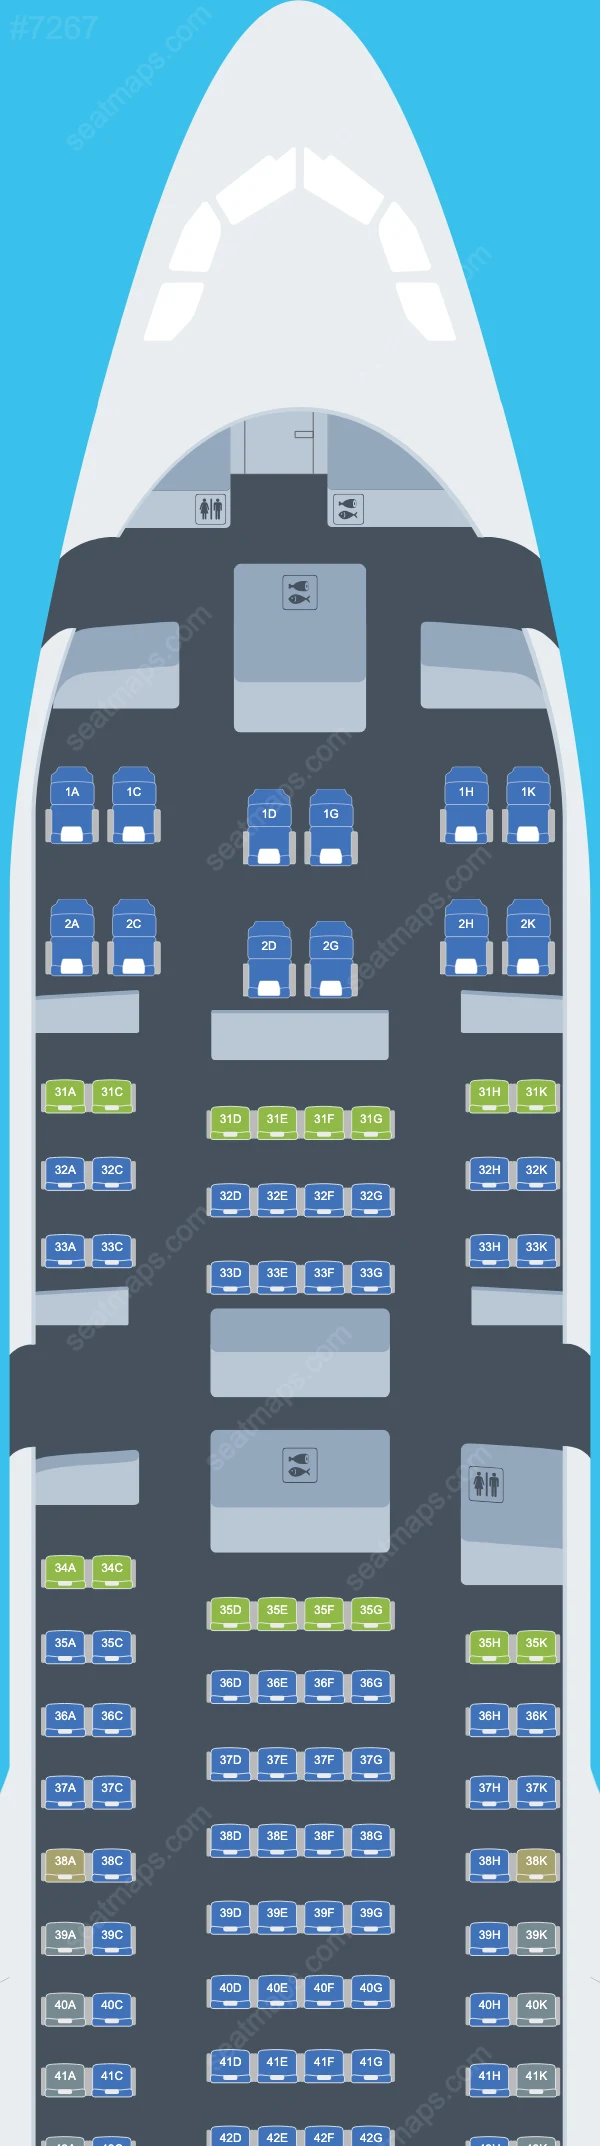 China Southern Airbus A330 Seat Maps A330-200 V.2